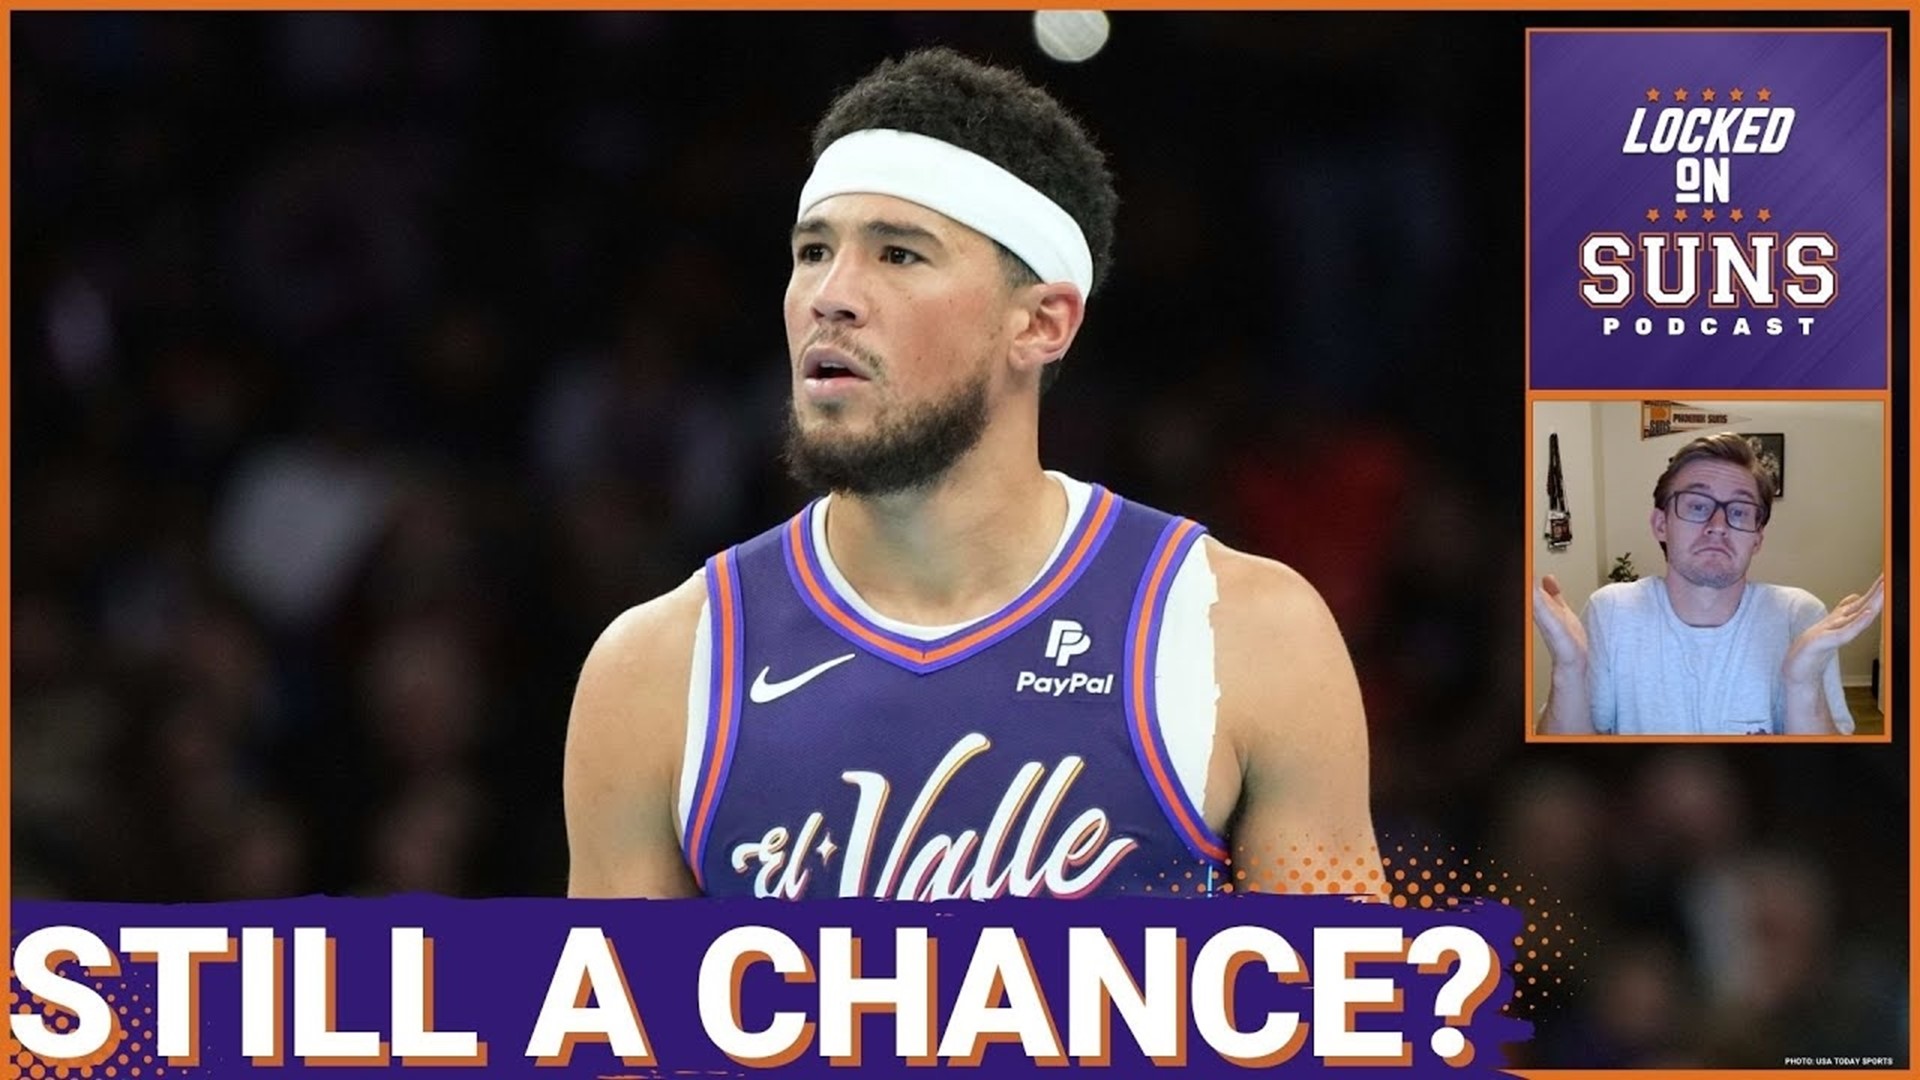 Devin Booker, Kevin Durant and the Phoenix Suns may still have a title run in them, but an NBA championship would be a historical anomaly given their performance thi